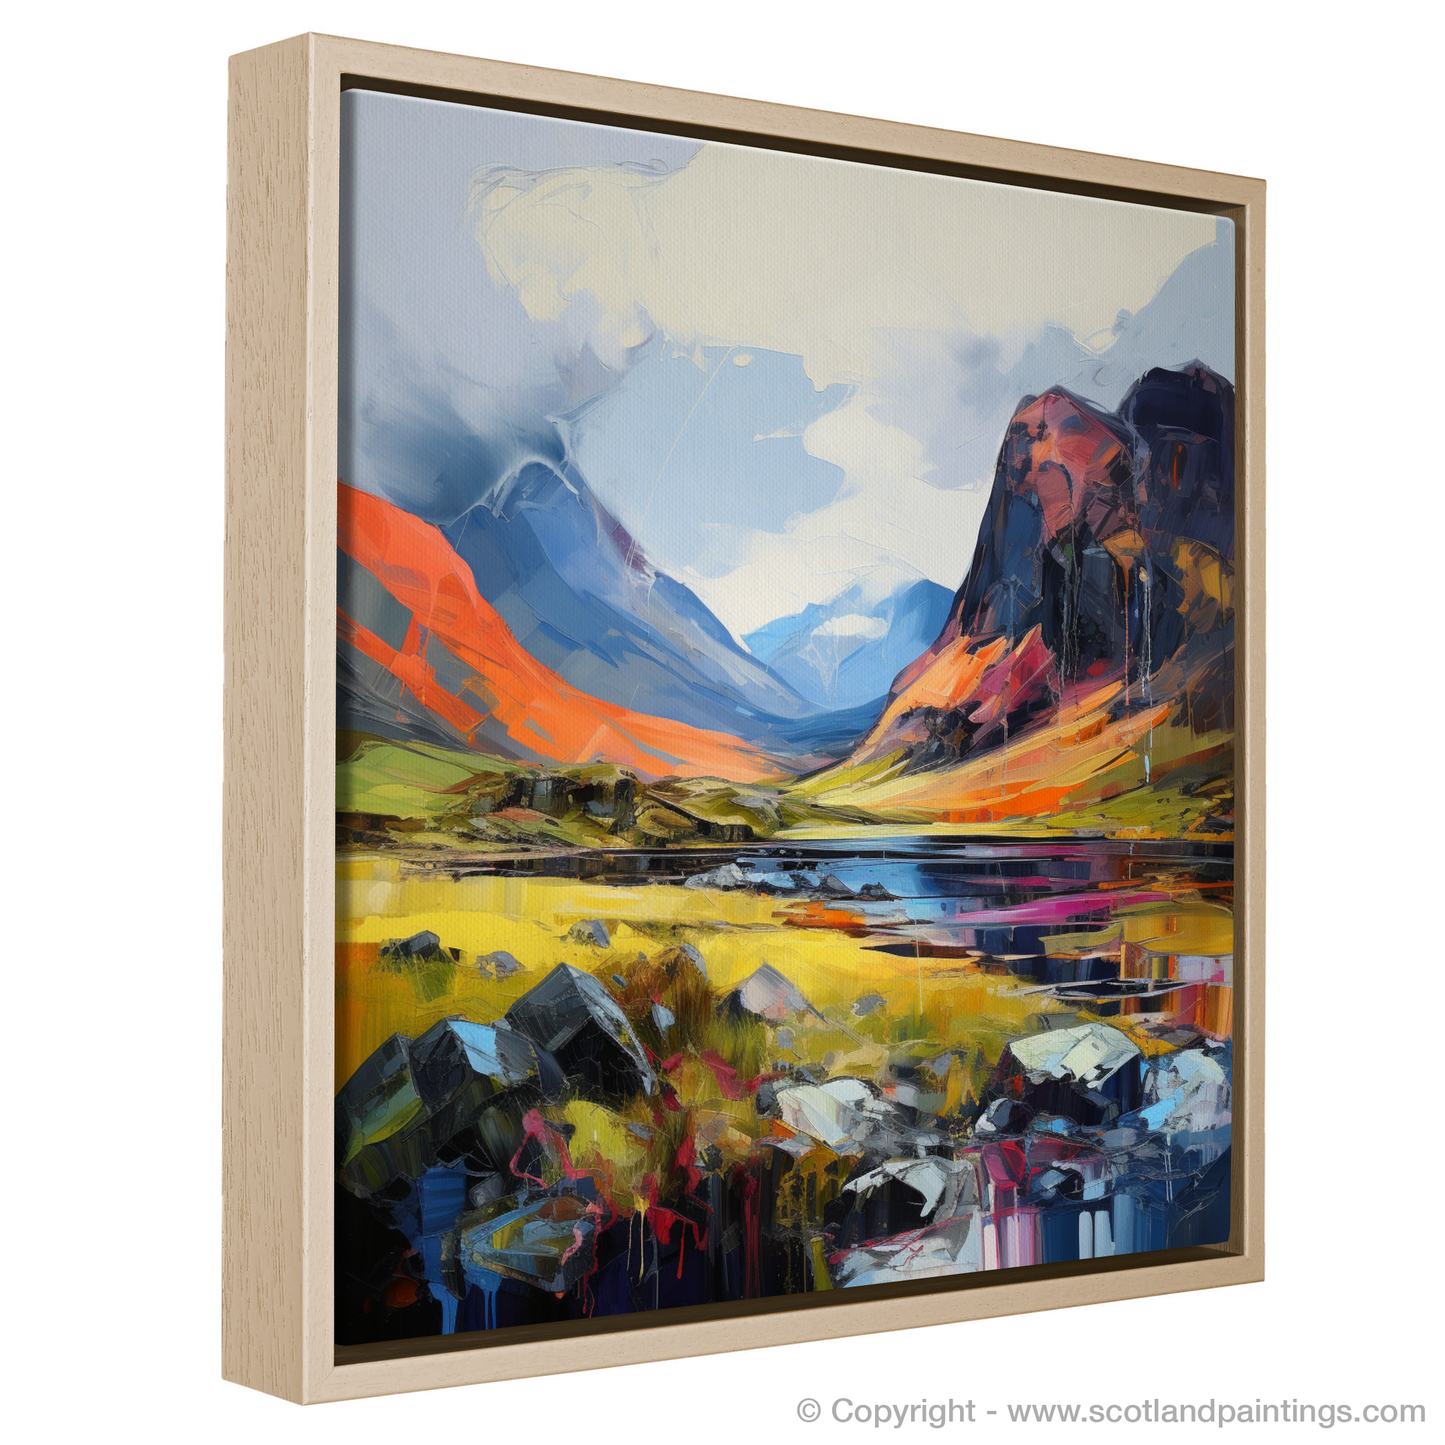 Painting and Art Print of Creag Leacach. Creag Leacach: An Expressionist Ode to the Scottish Highlands.